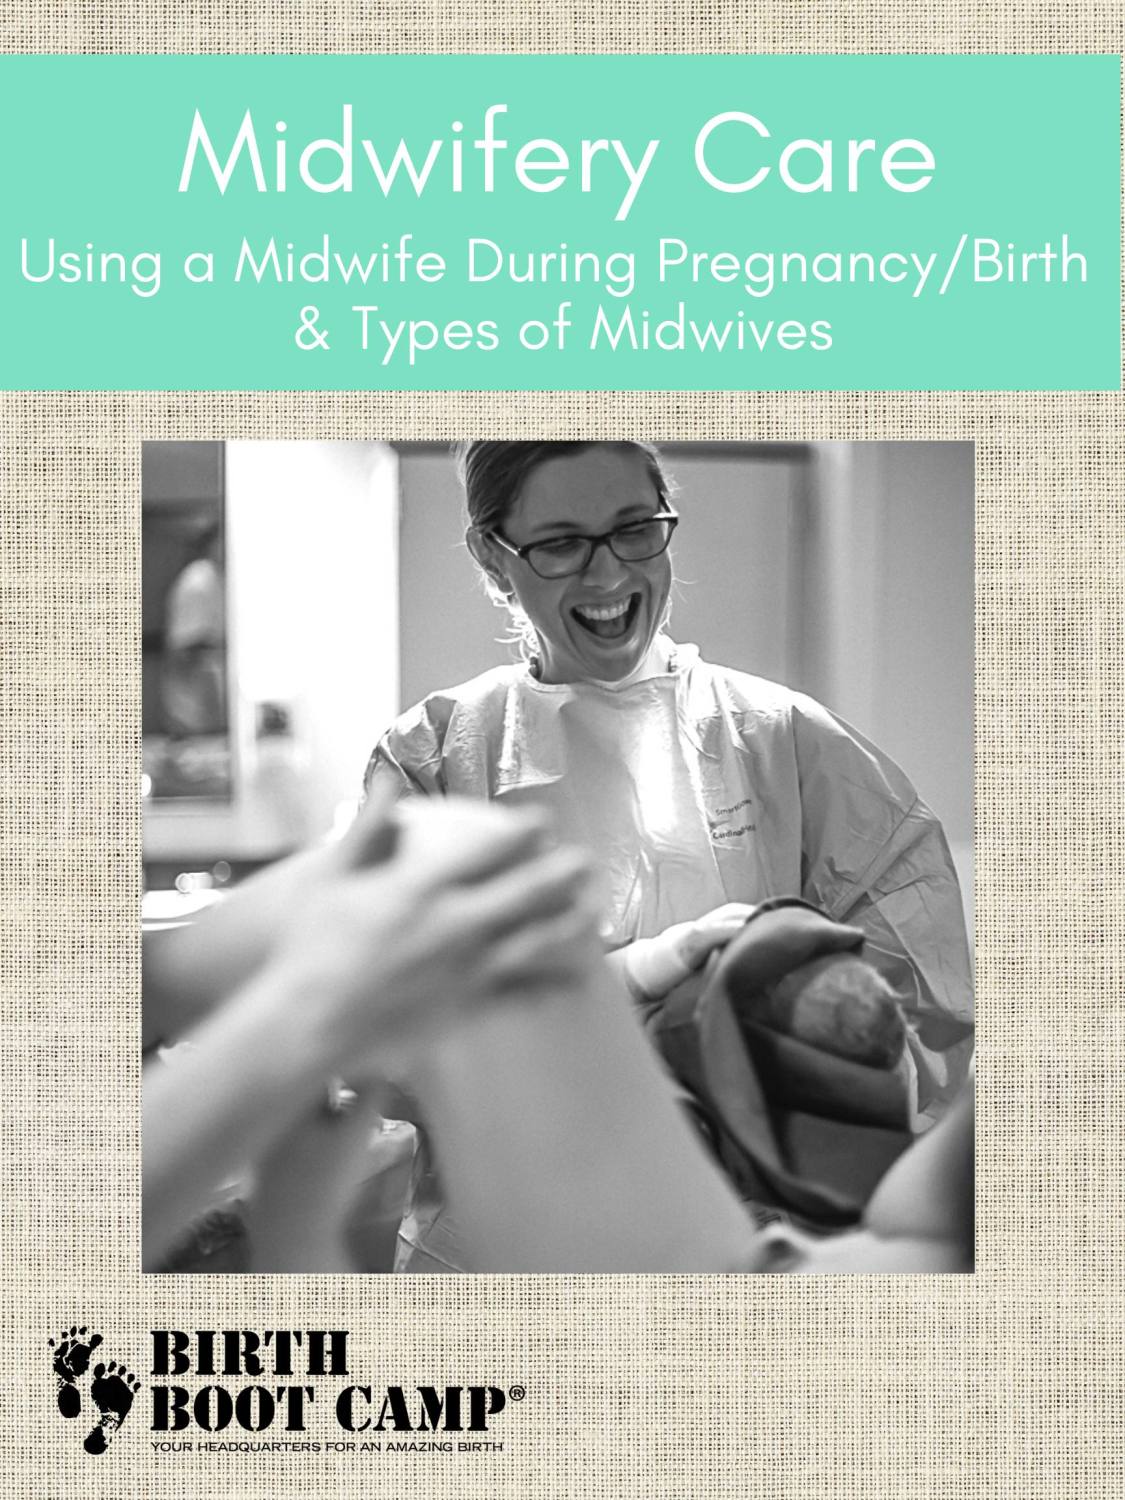 Using a Midwife During Pregnancy and Birth & Types of Midwives